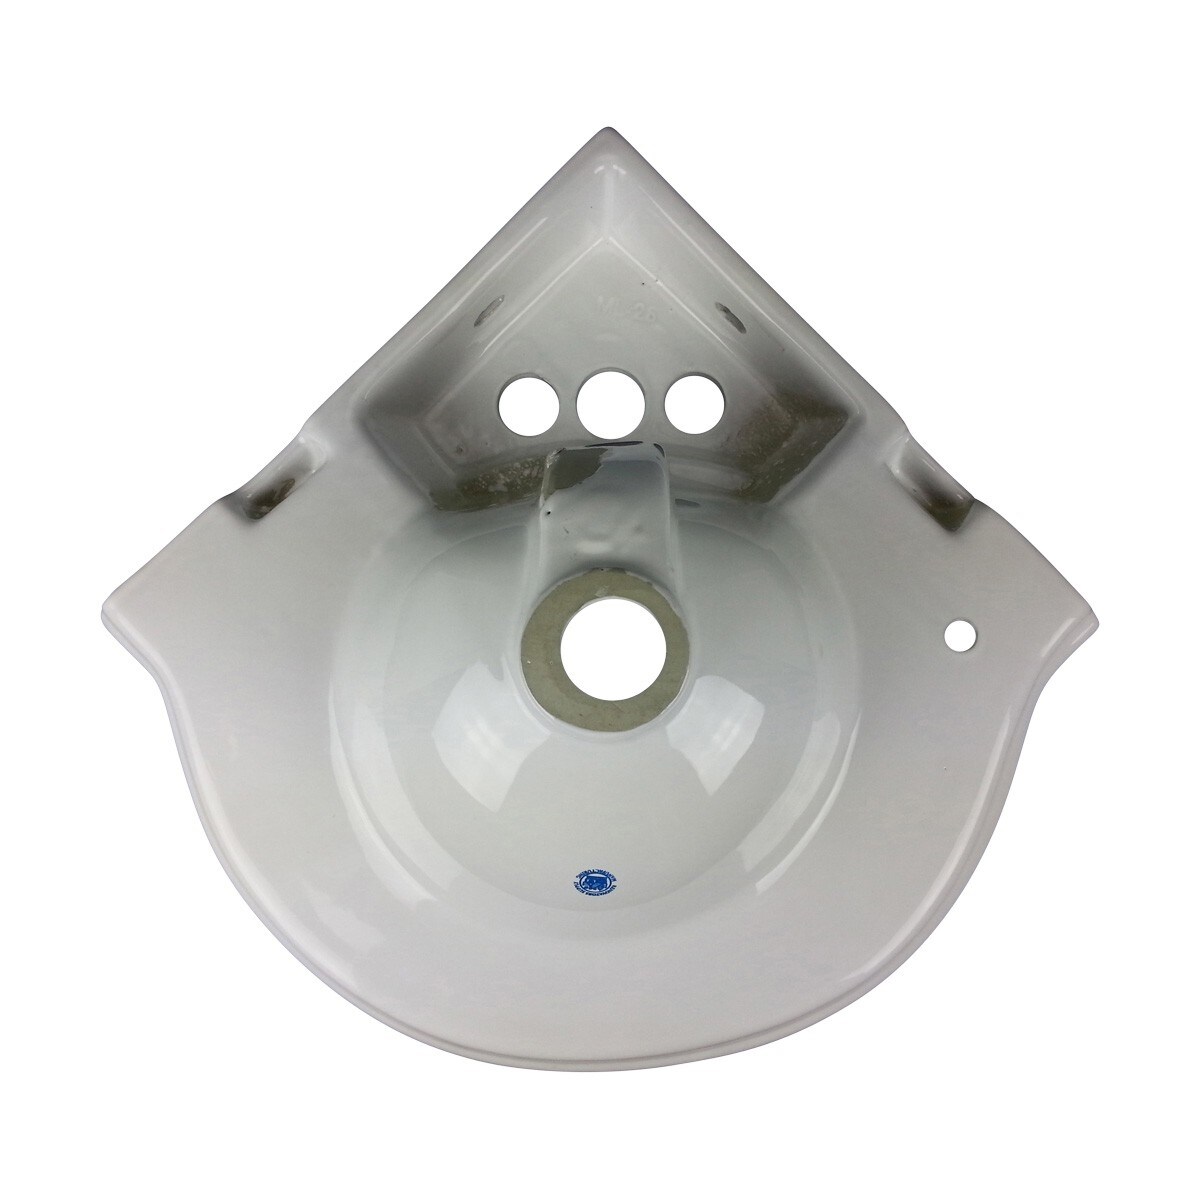 Corner Wall Mount Small Bathroom Sink White Gloss China Portsmouth With Bracket